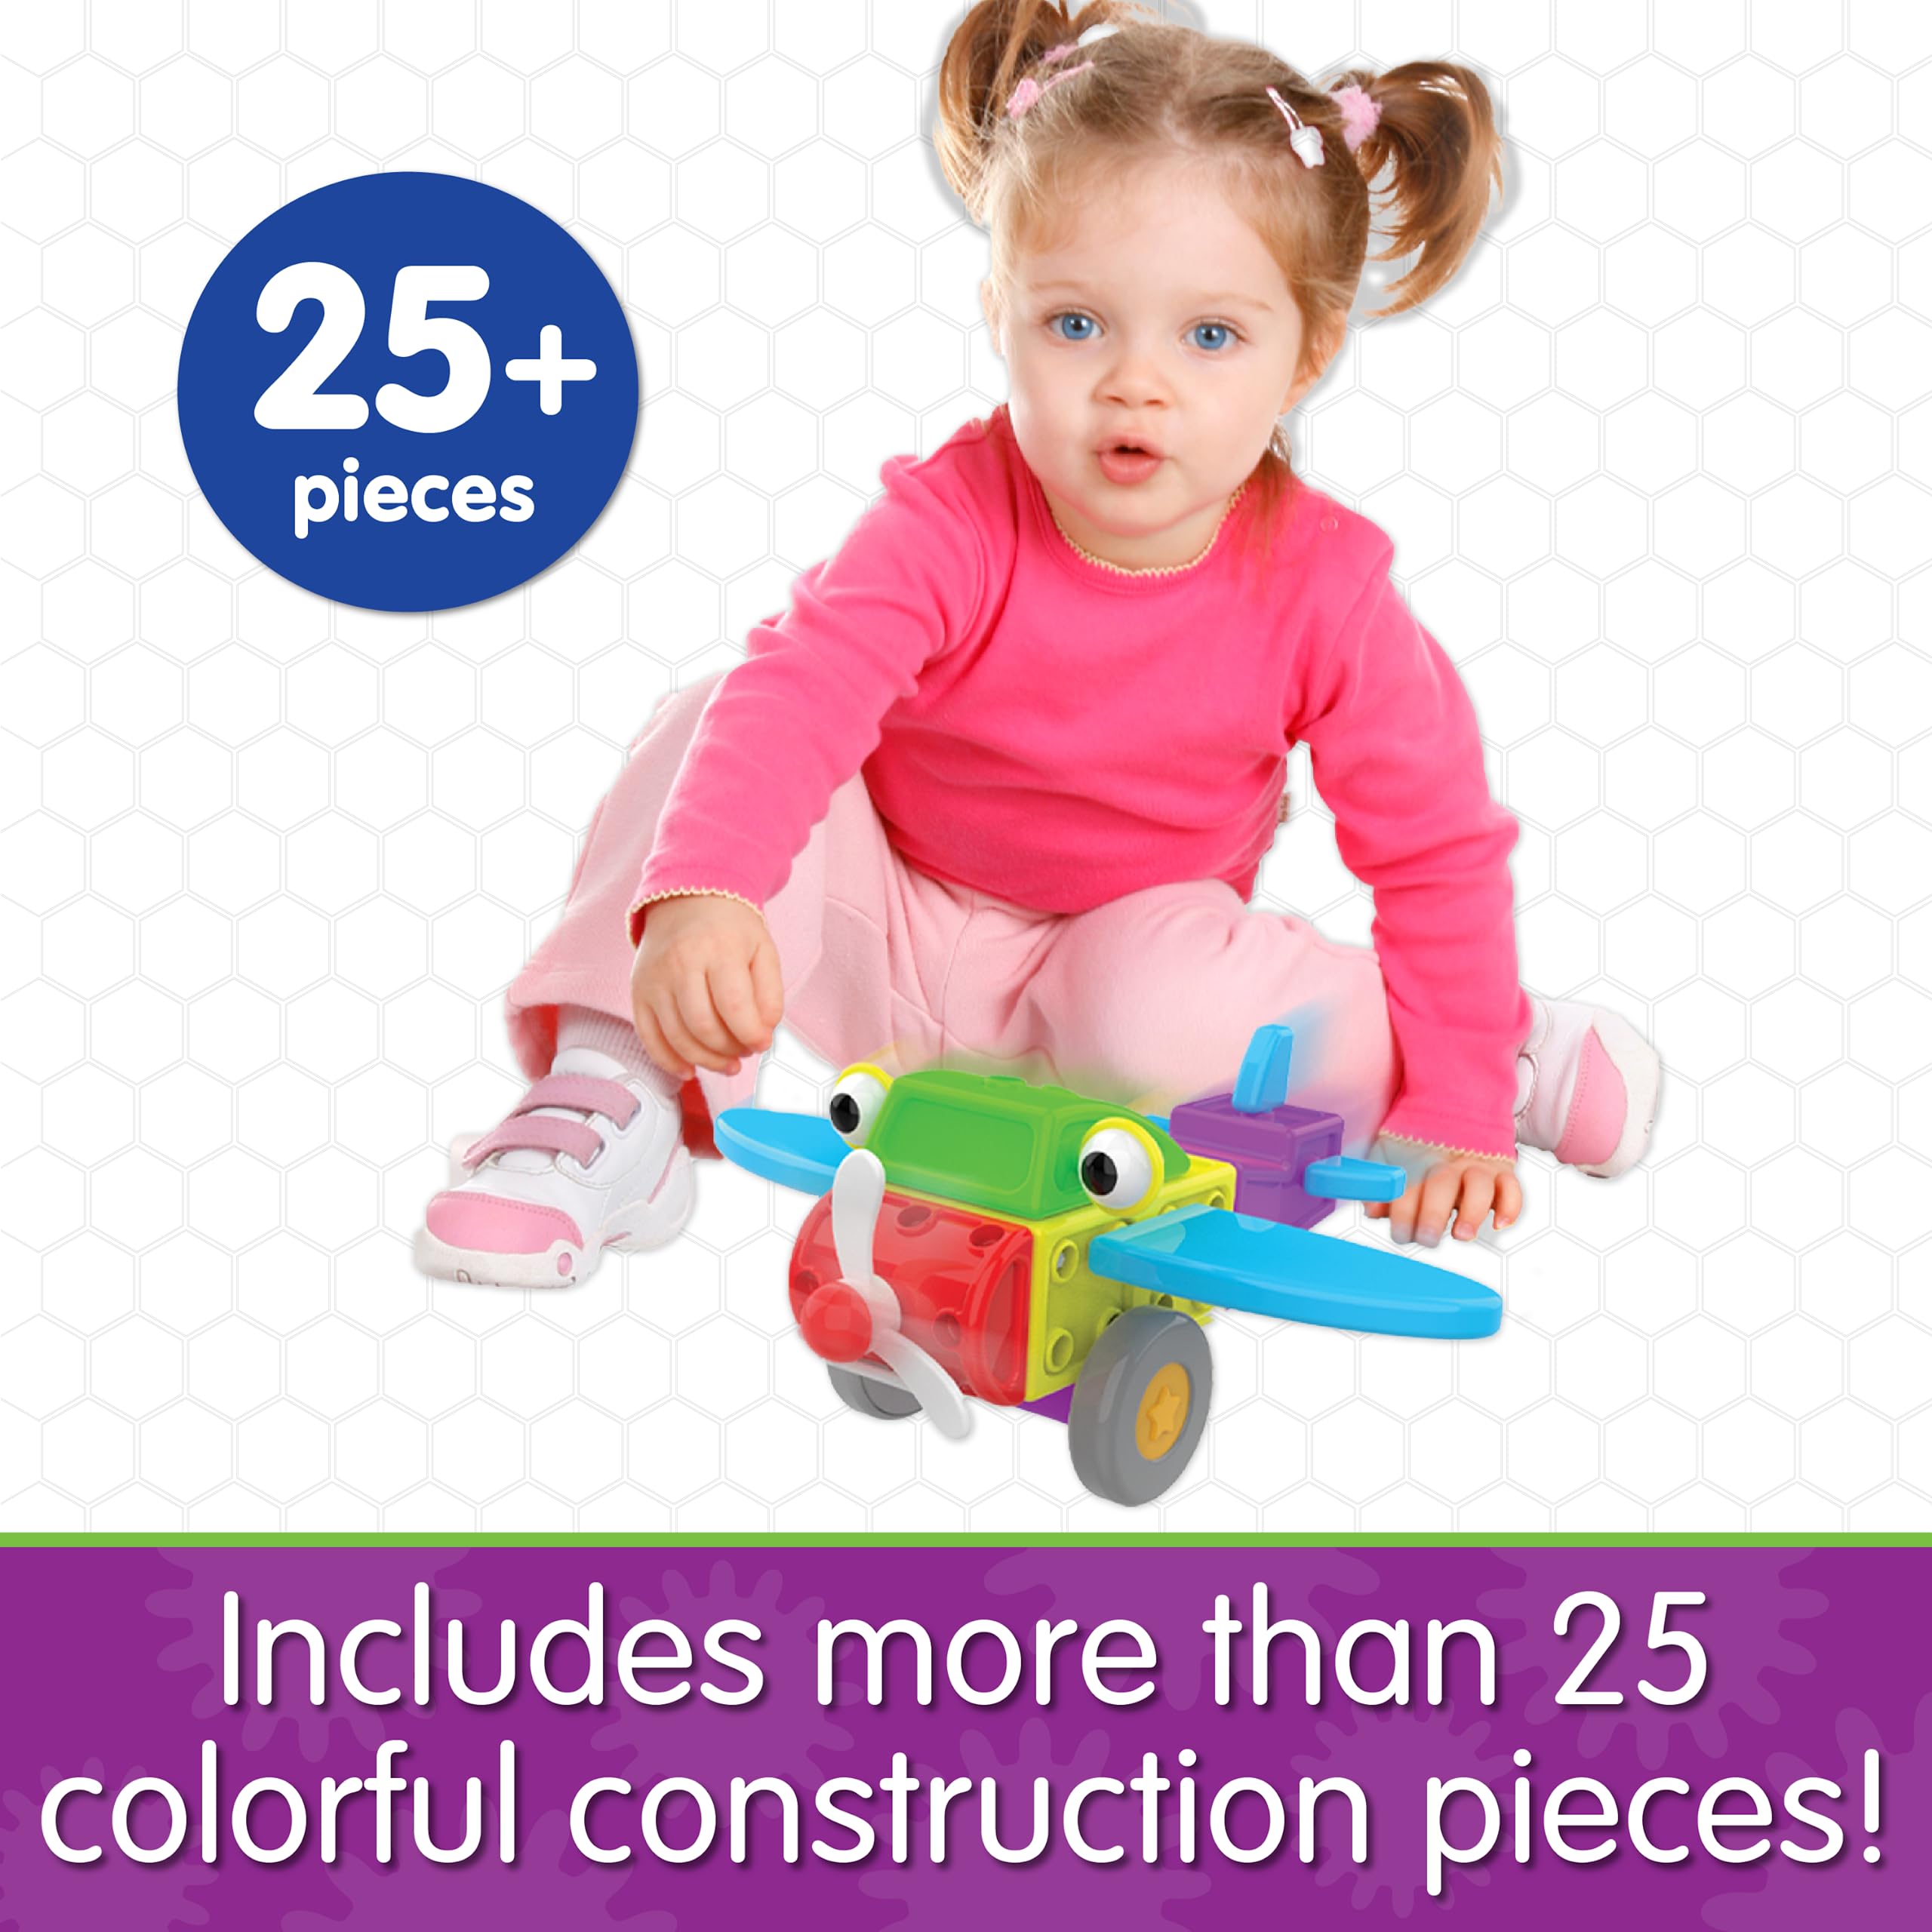 The Learning Journey: Techno Kids 4-in-1 On The Go - STEM Construction Set - Toy Interlocking Gear Sets for Children Ages 3 Years and Up - Award Winning Toys